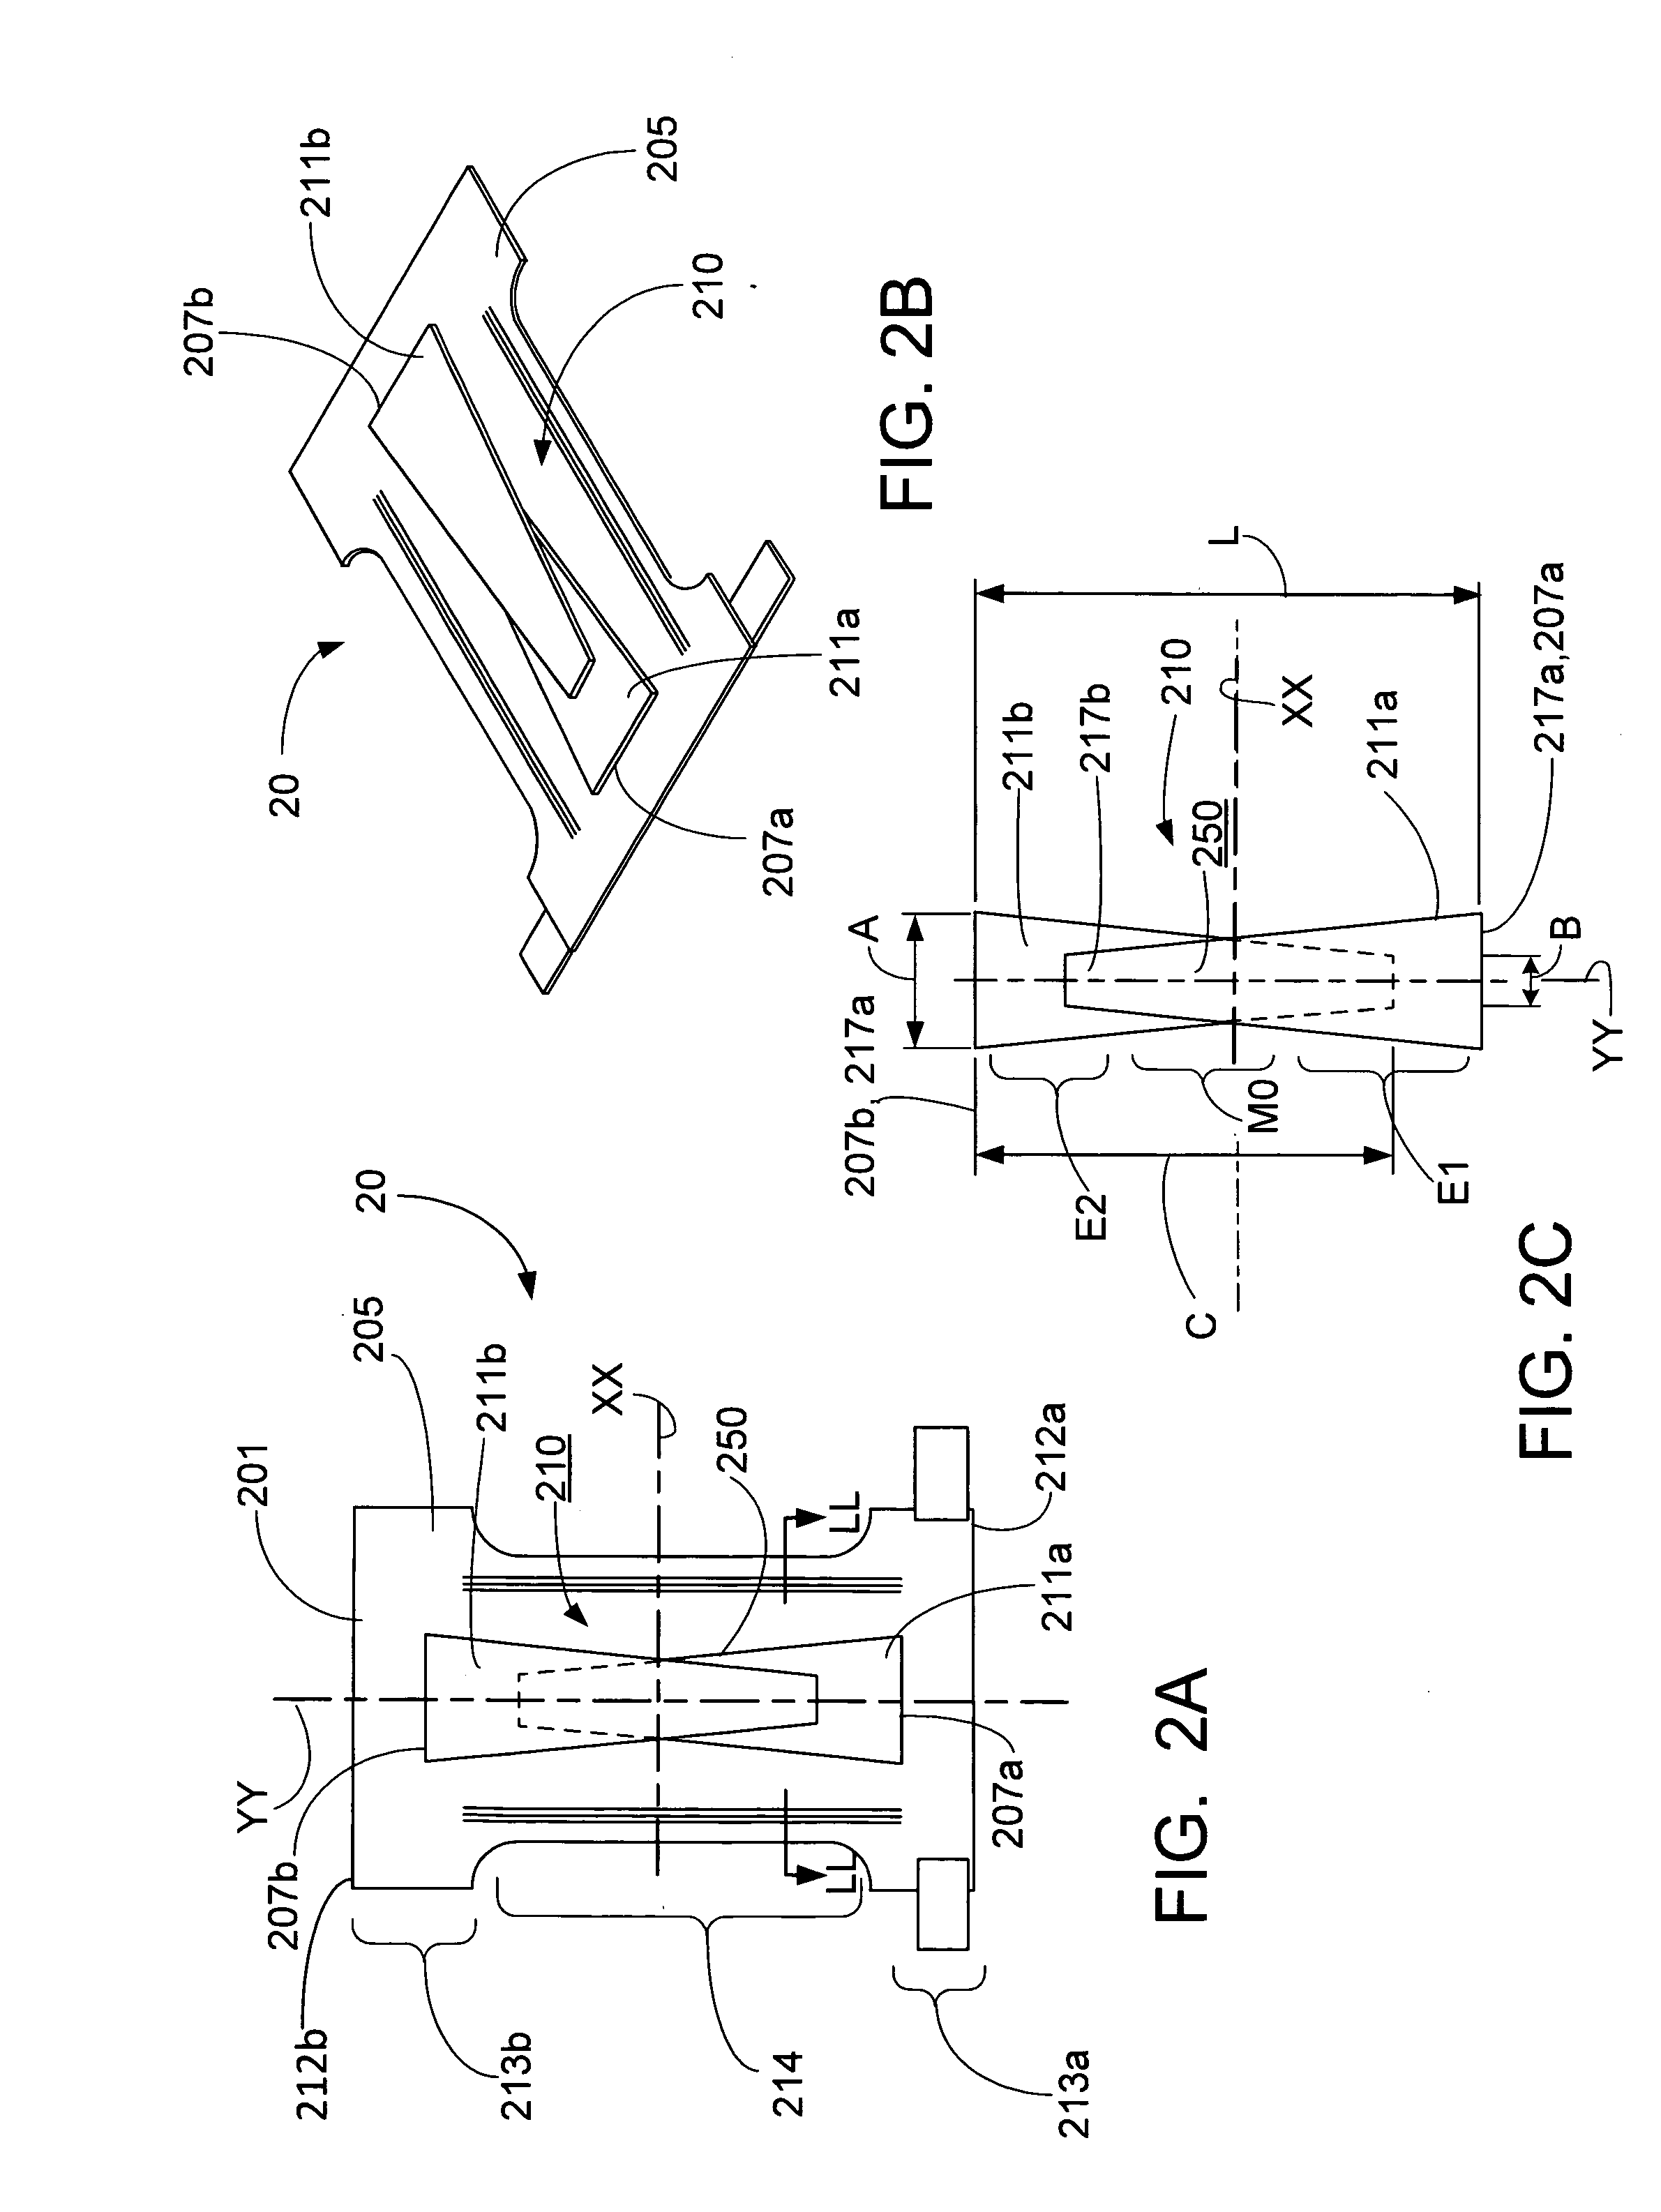 Disposable absorbent article with profiled absorbent core